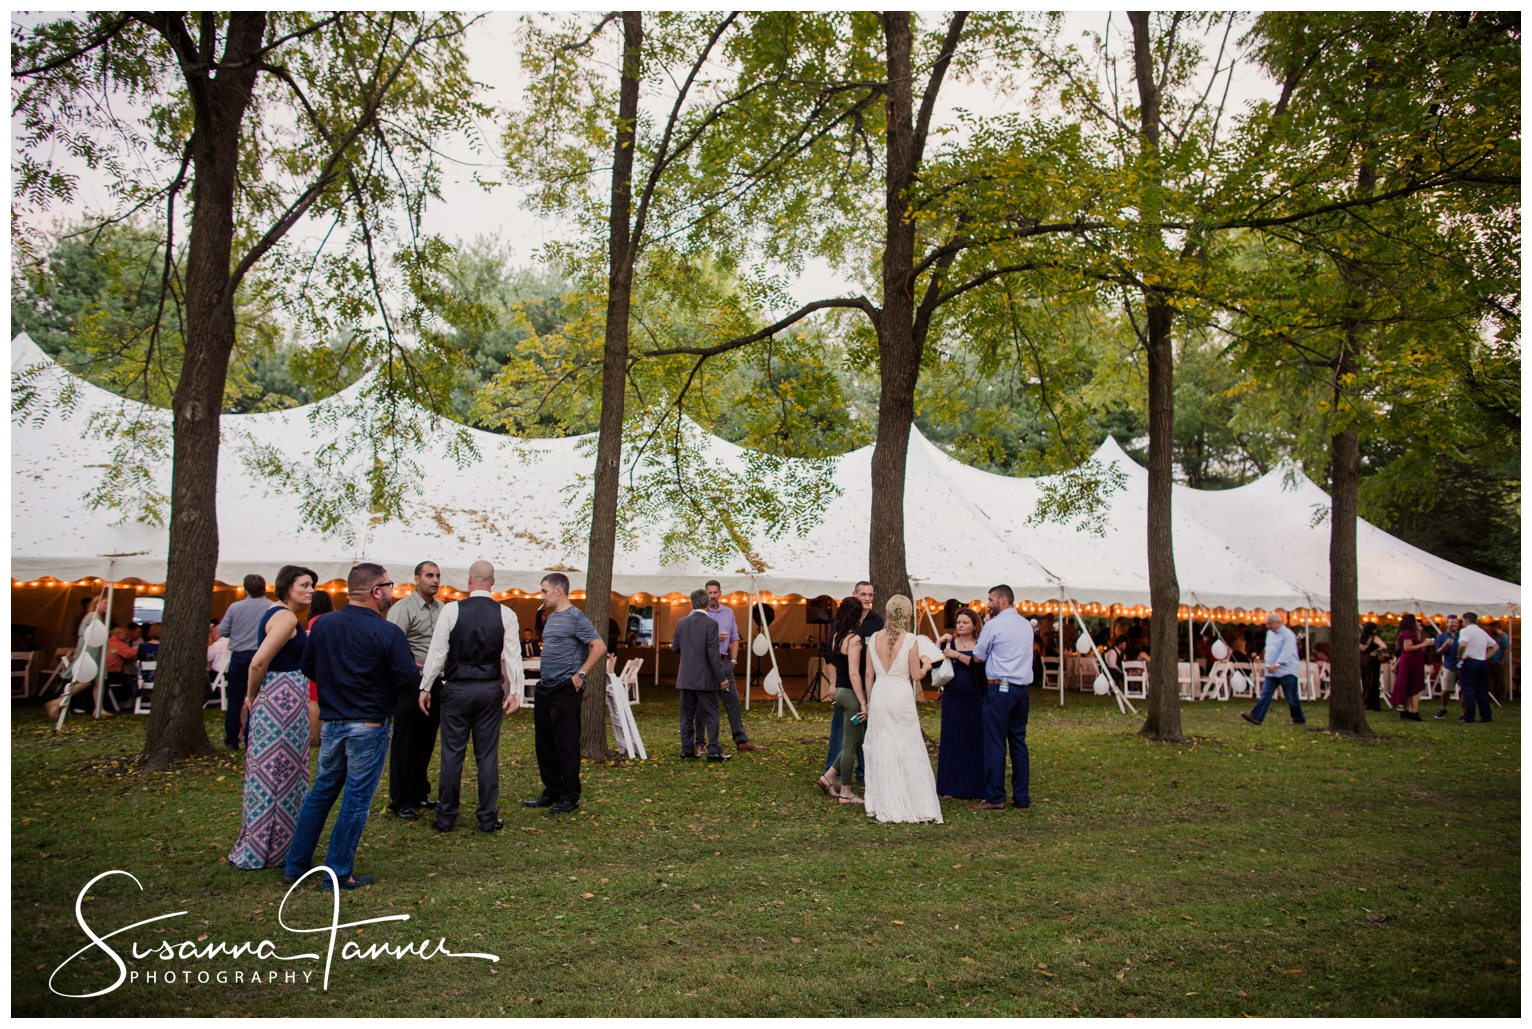 Indianapolis Outdoor Wedding, photo of large white topped tent in backyard for reception. People standing around talking.